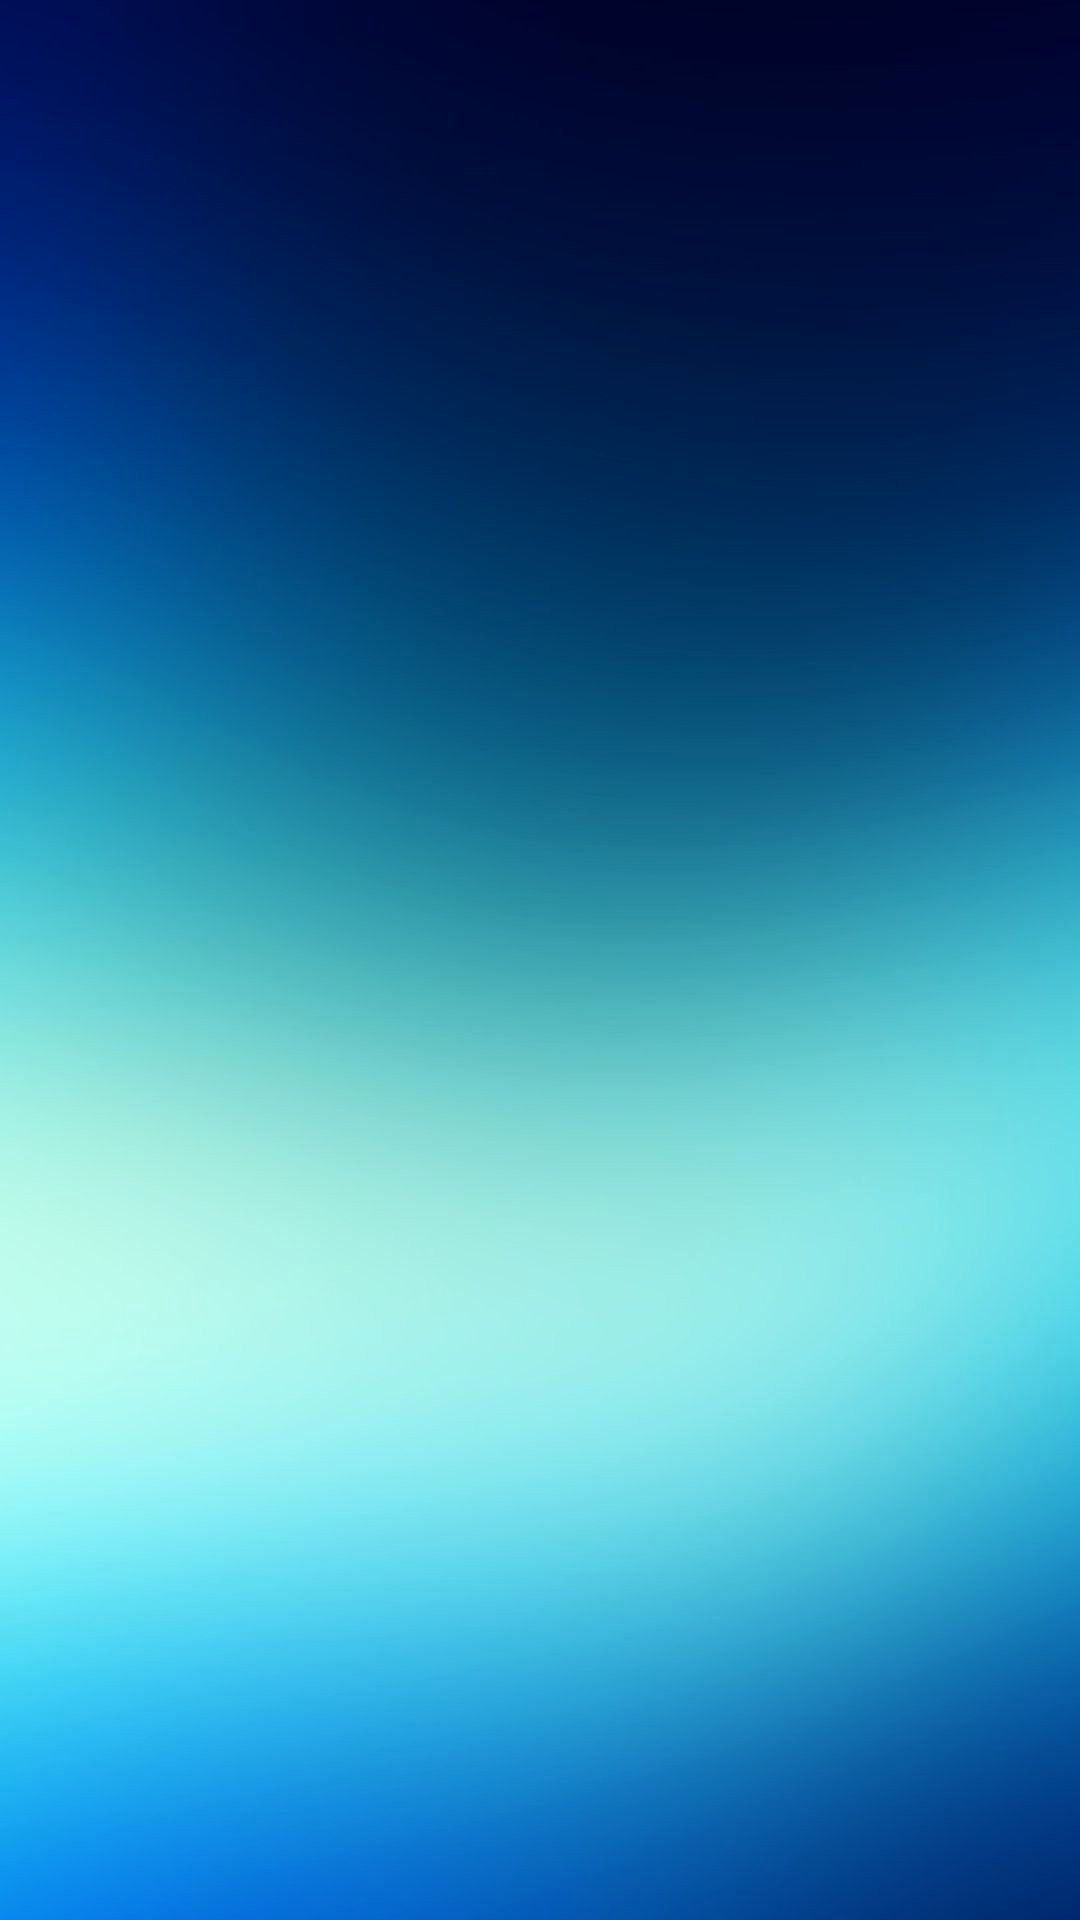 Blue iPhone Backgrounds Awesome Blue Blur iPhone 6 Plus Wallpapers